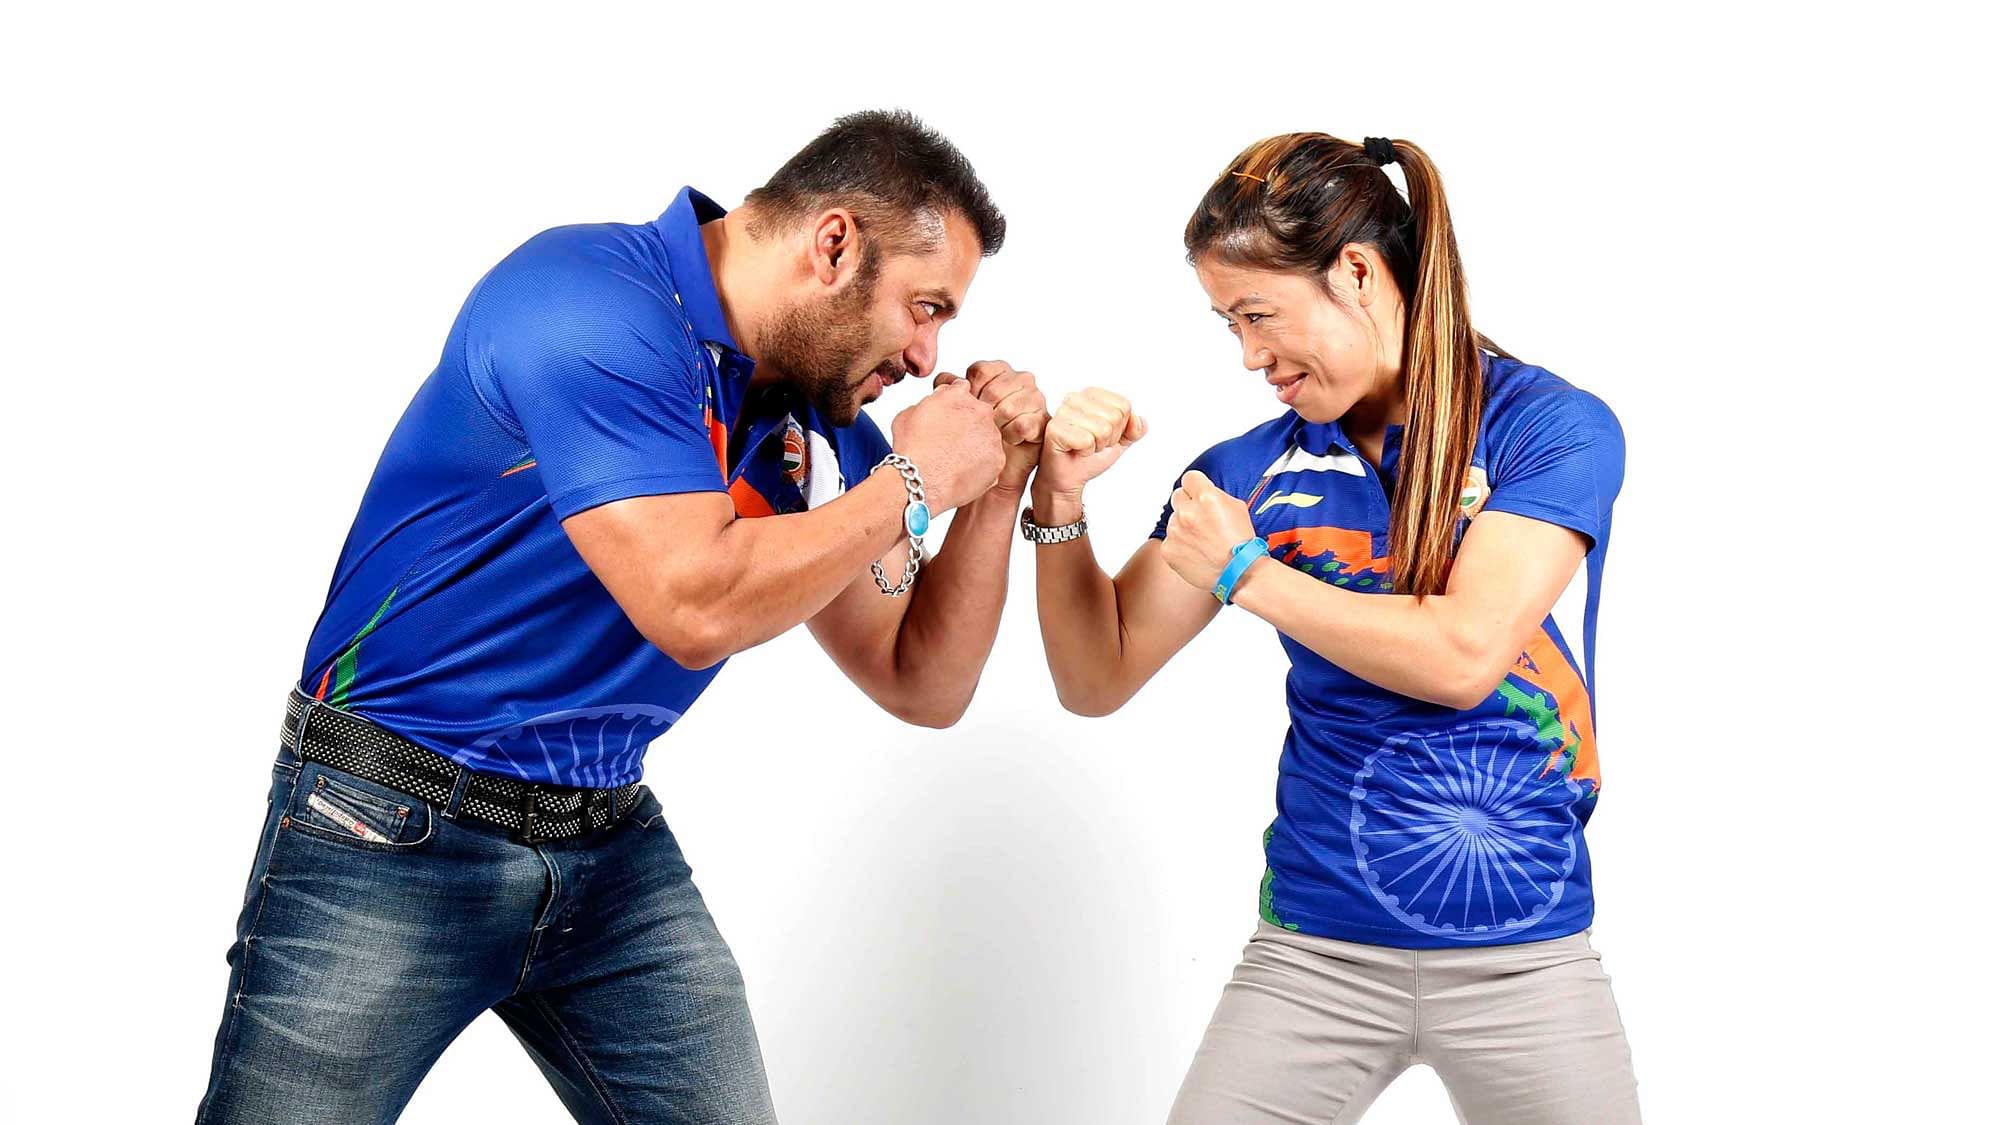 MC Mary Kom in a photo shoot with one of India’s Goodwill Ambassadors to Rio, Salman Khan.